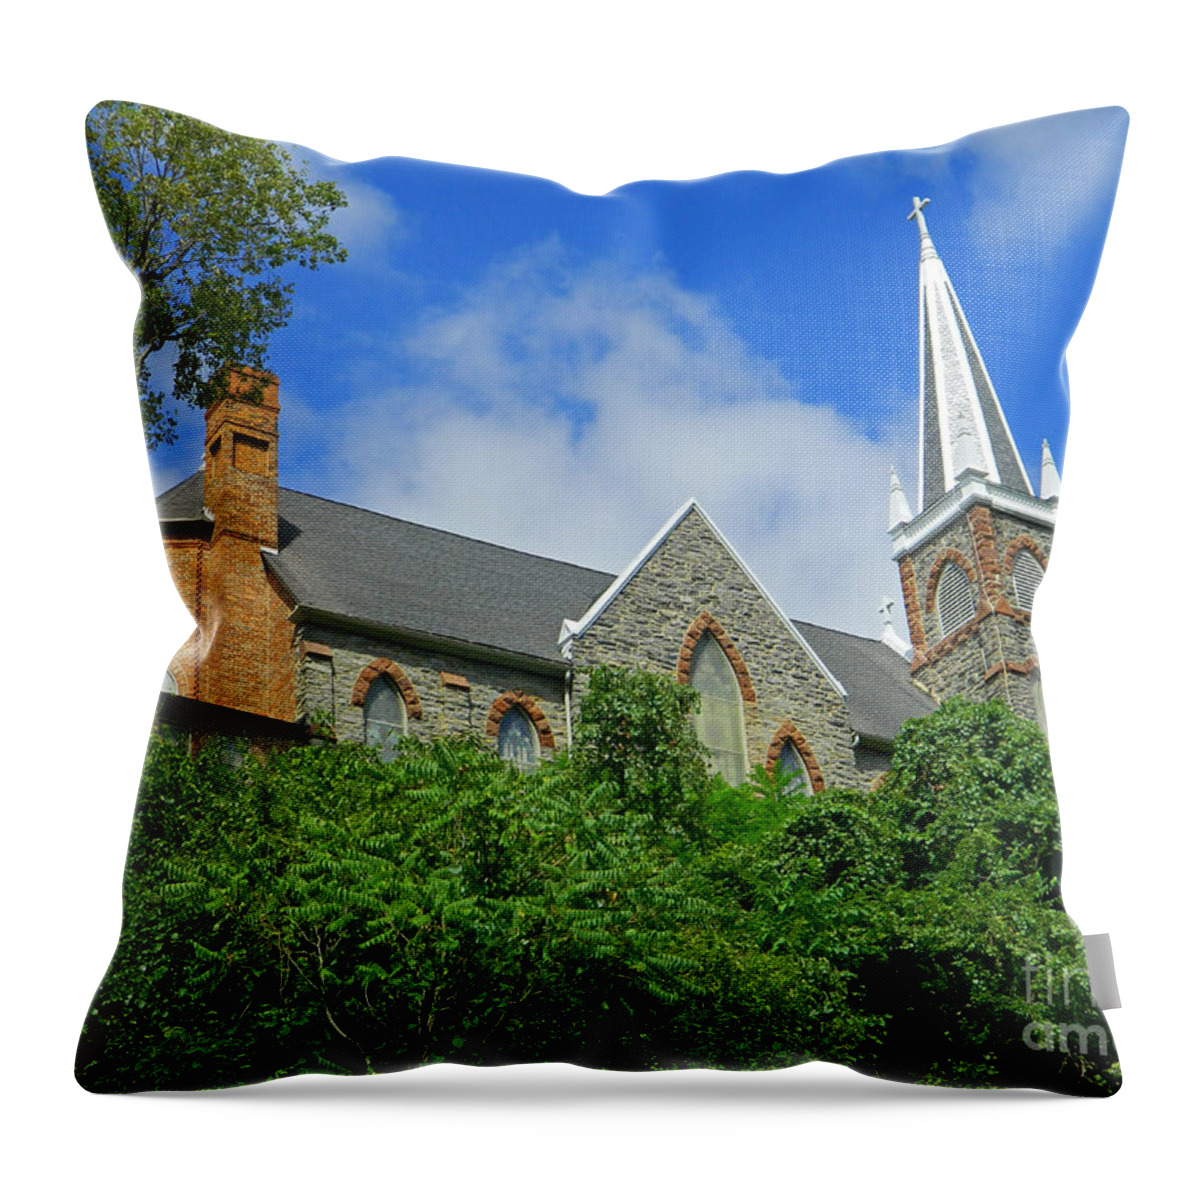 St. Peters Roman Catholic Church Throw Pillow featuring the photograph St. Peters Roman Catholic Church In Harpers Ferry by Emmy Vickers